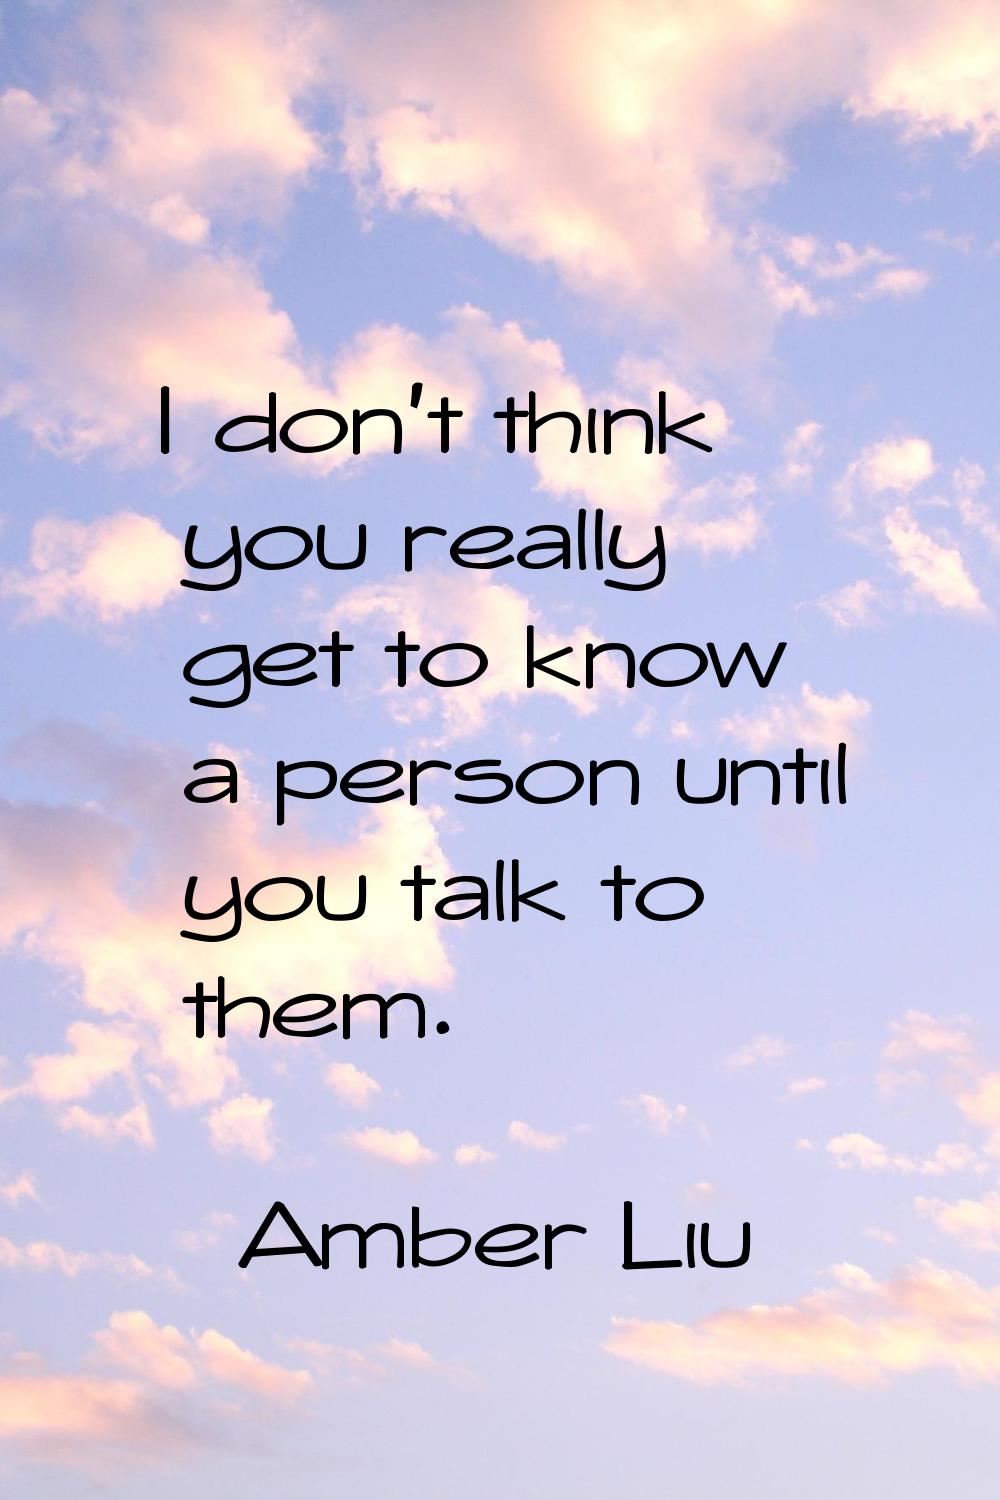 I don't think you really get to know a person until you talk to them.